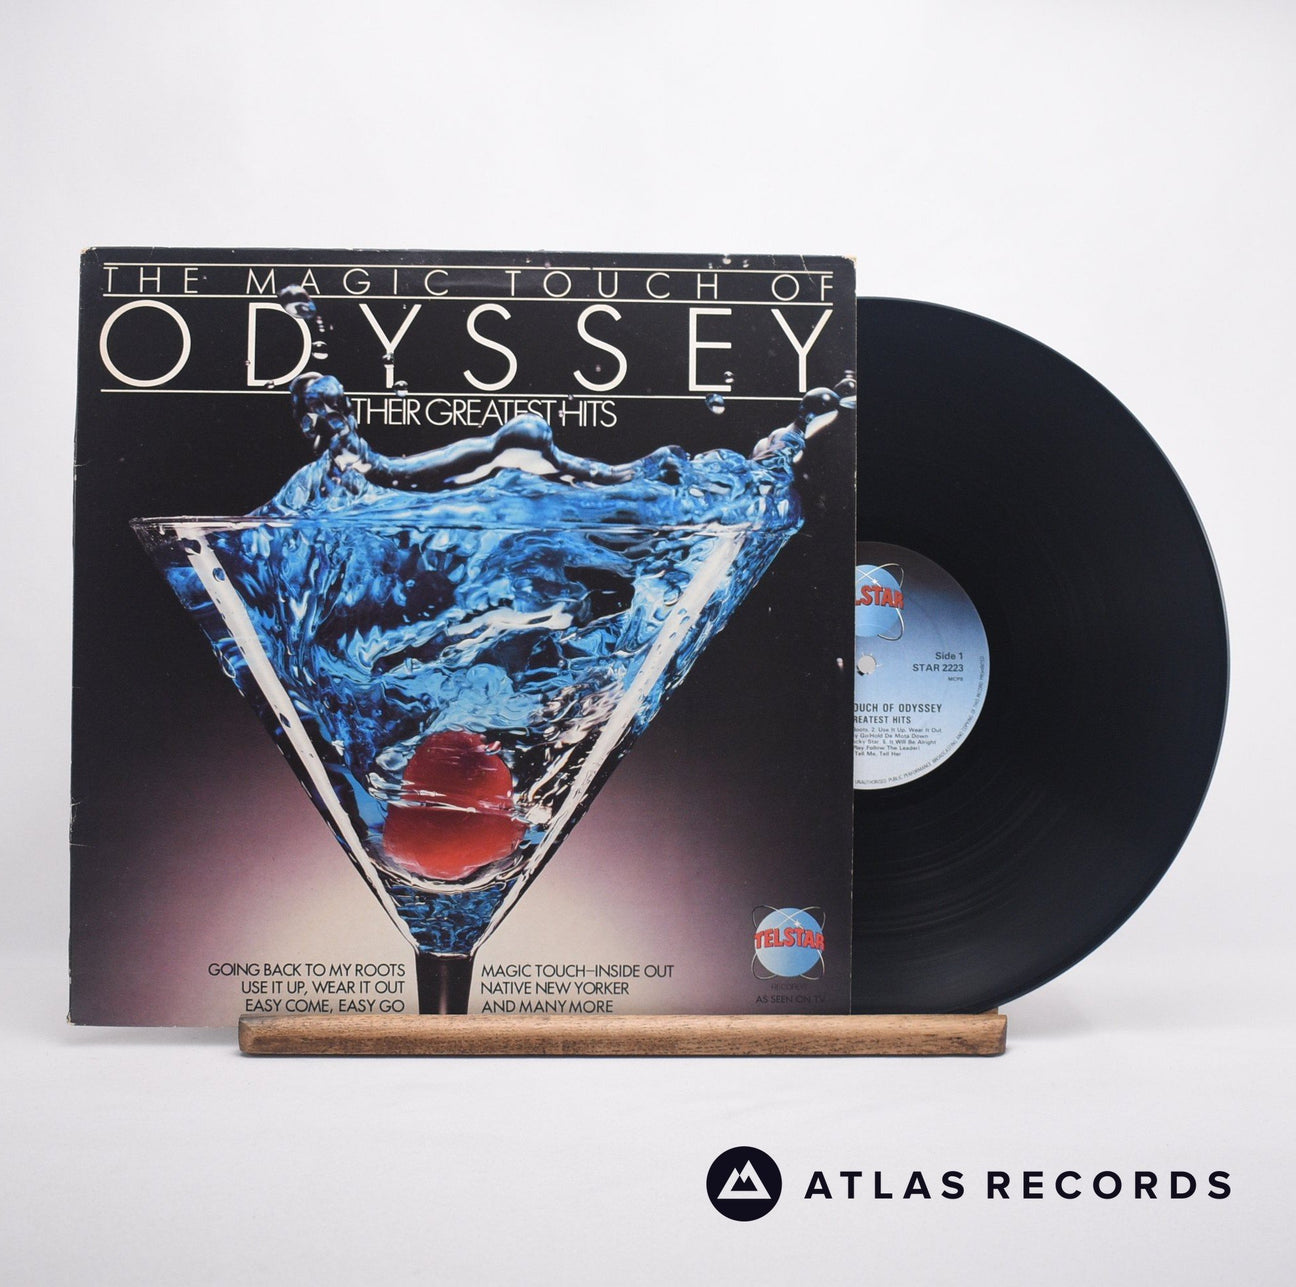 Odyssey The Magic Touch Of Odyssey LP Vinyl Record - Front Cover & Record